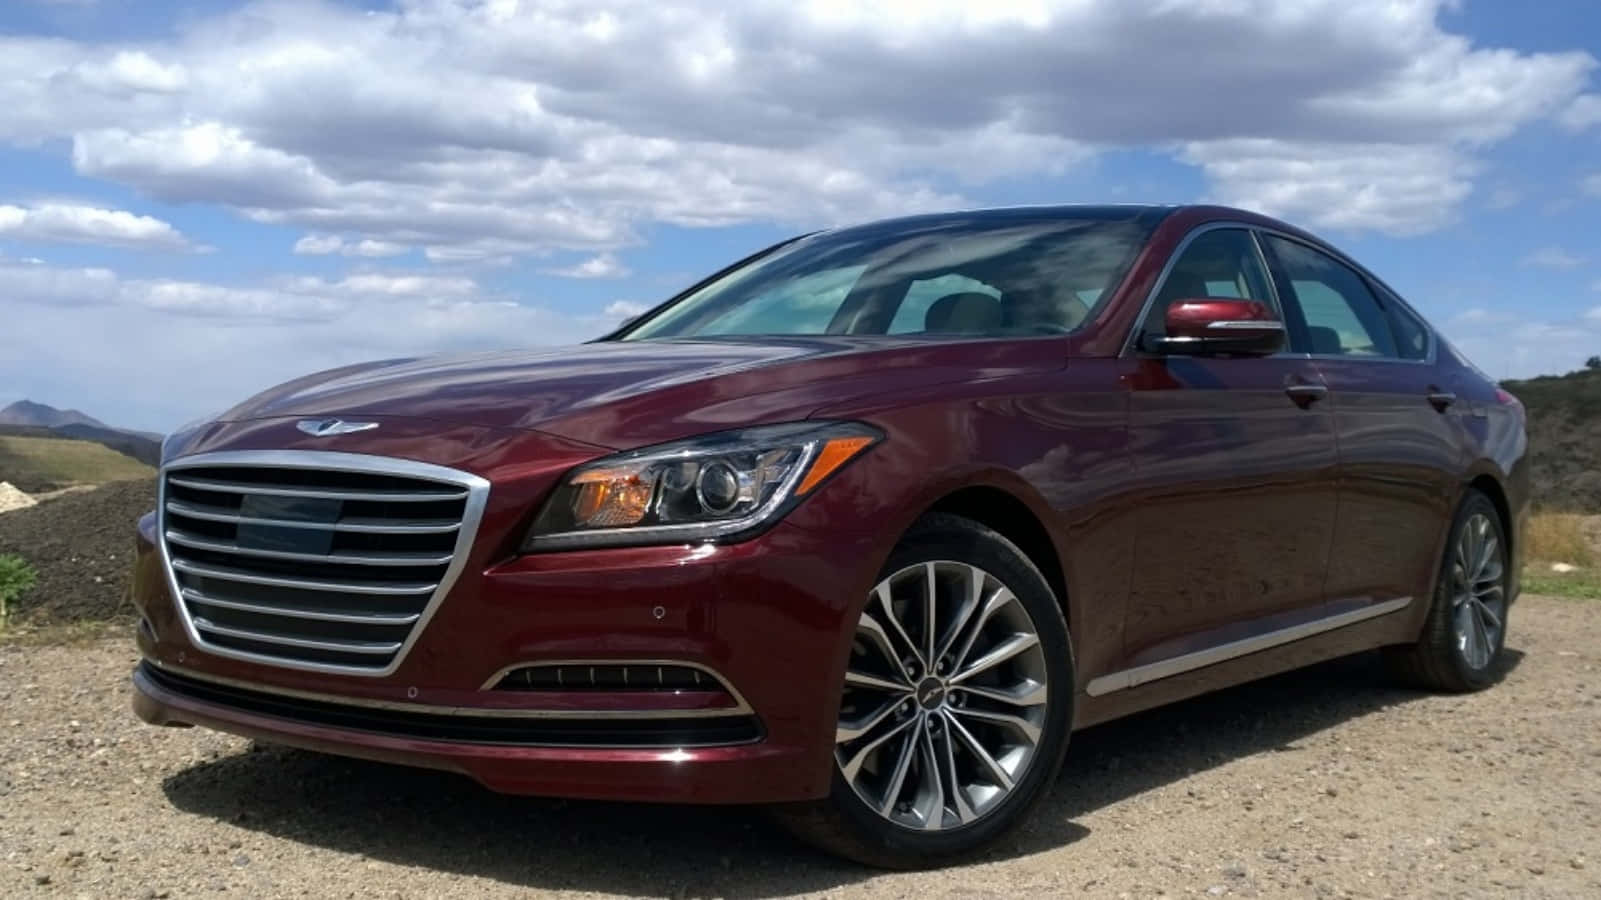 The Red Hyundai Genesis Is Parked On A Dirt Road